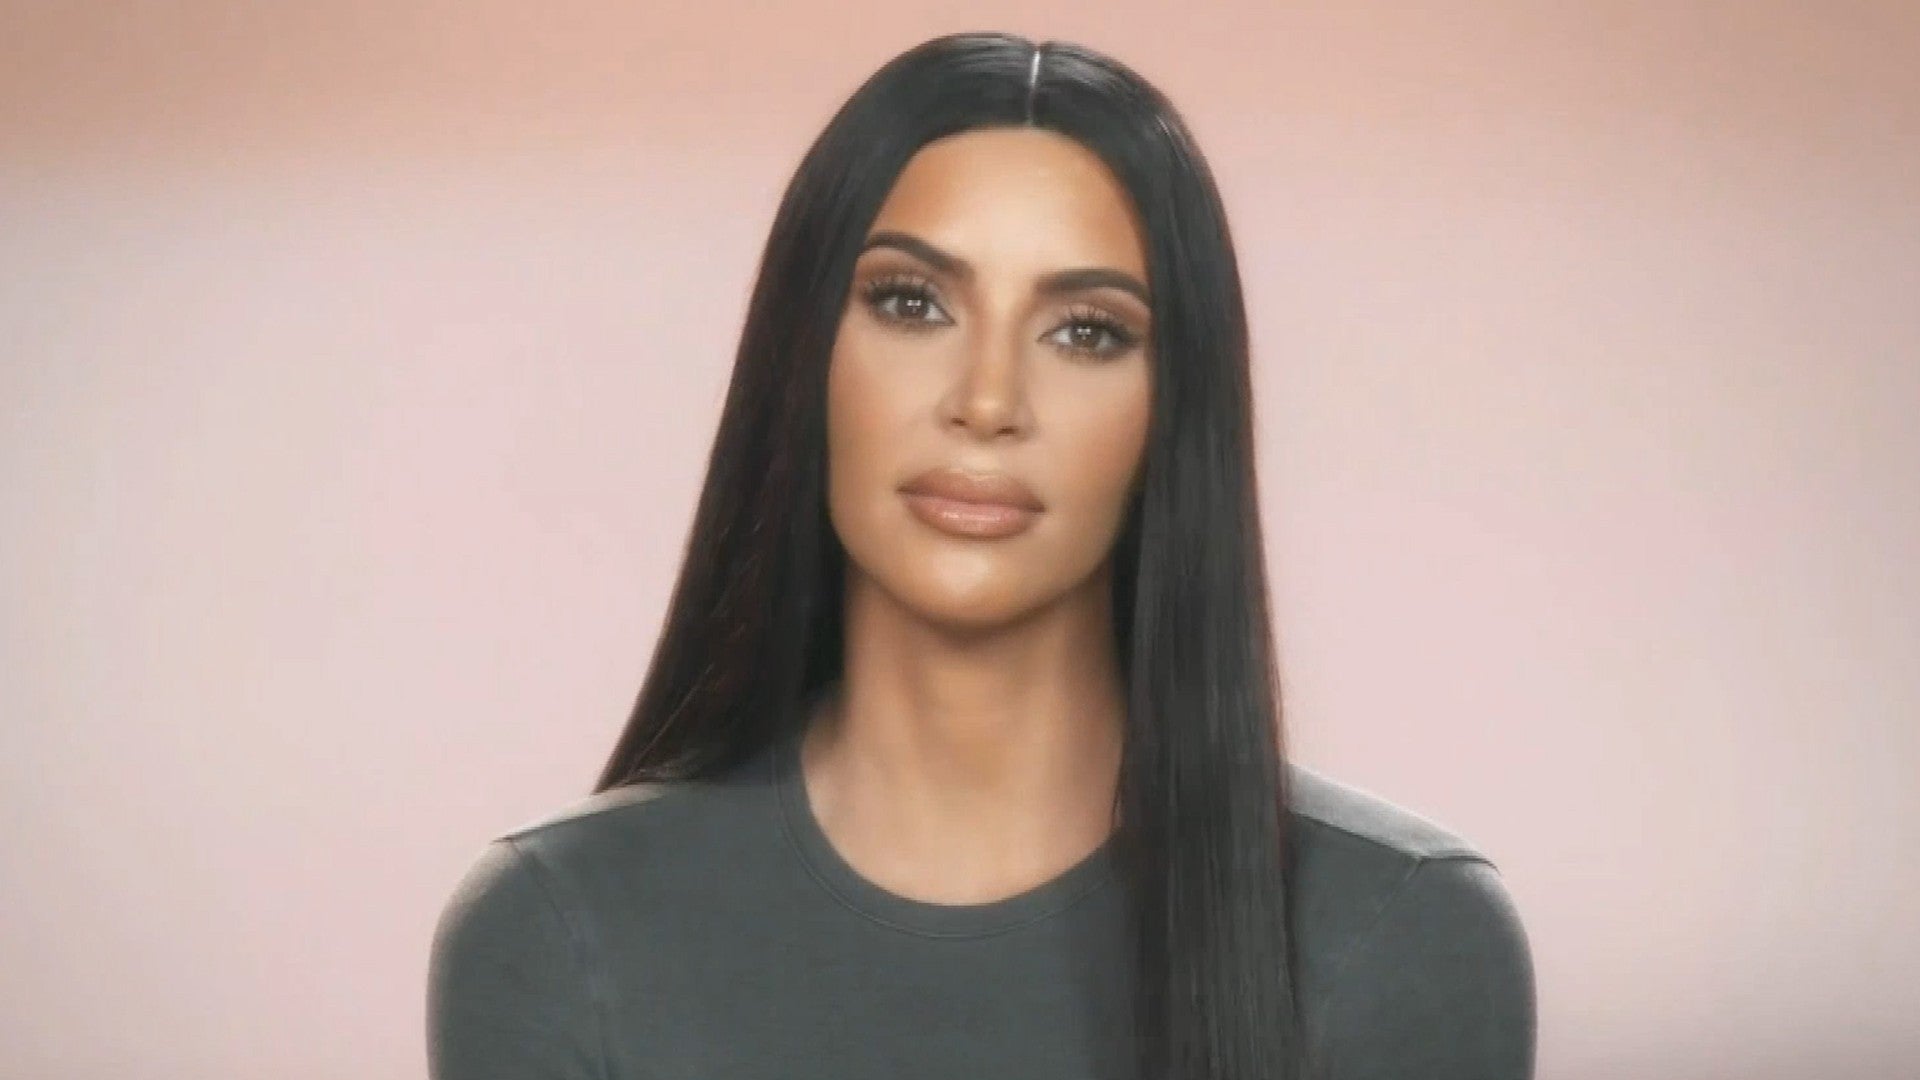 Kim Kardashian Says She Was on Ecstasy During Her Sex Tape image pic